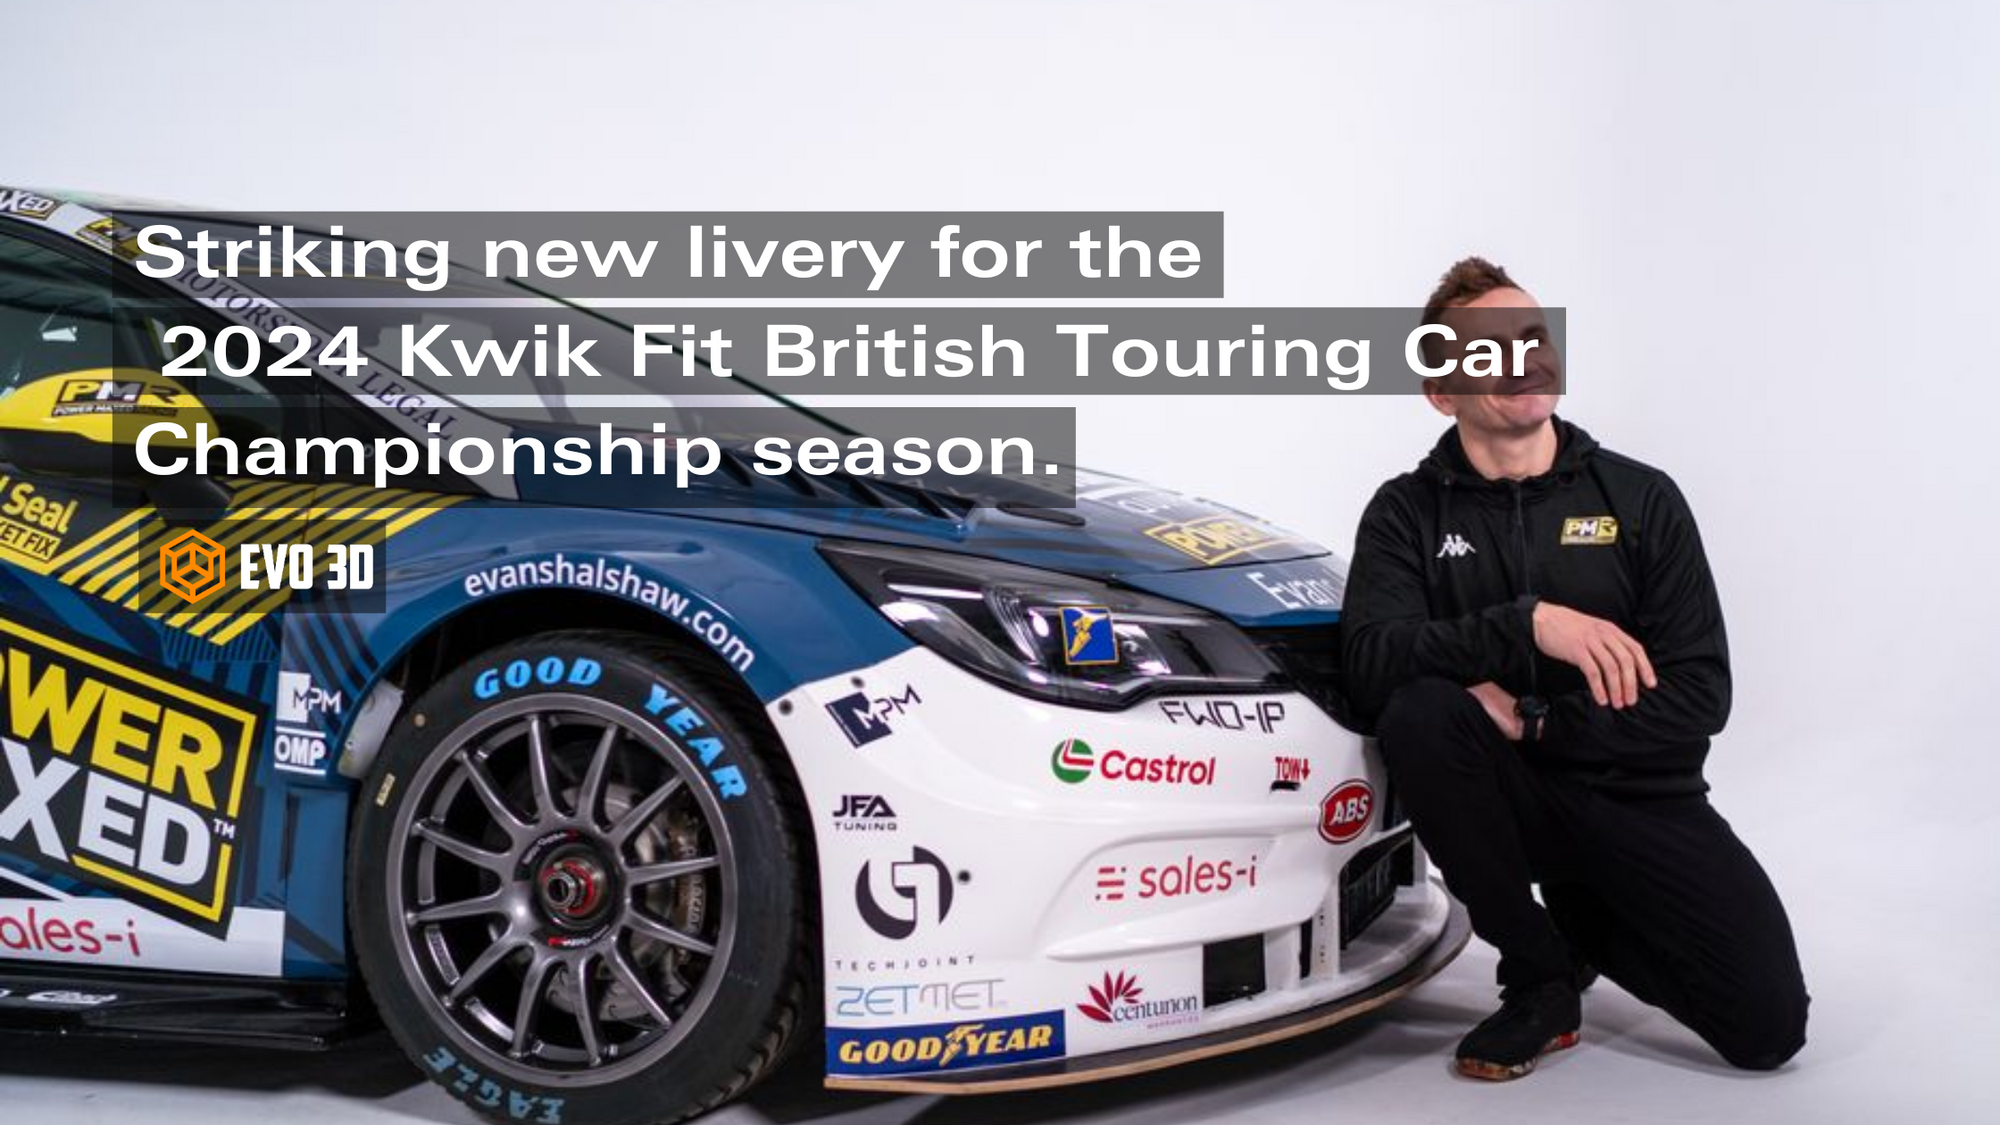 Striking new livery for the 2024 Kwik Fit British Touring Car Championship season.